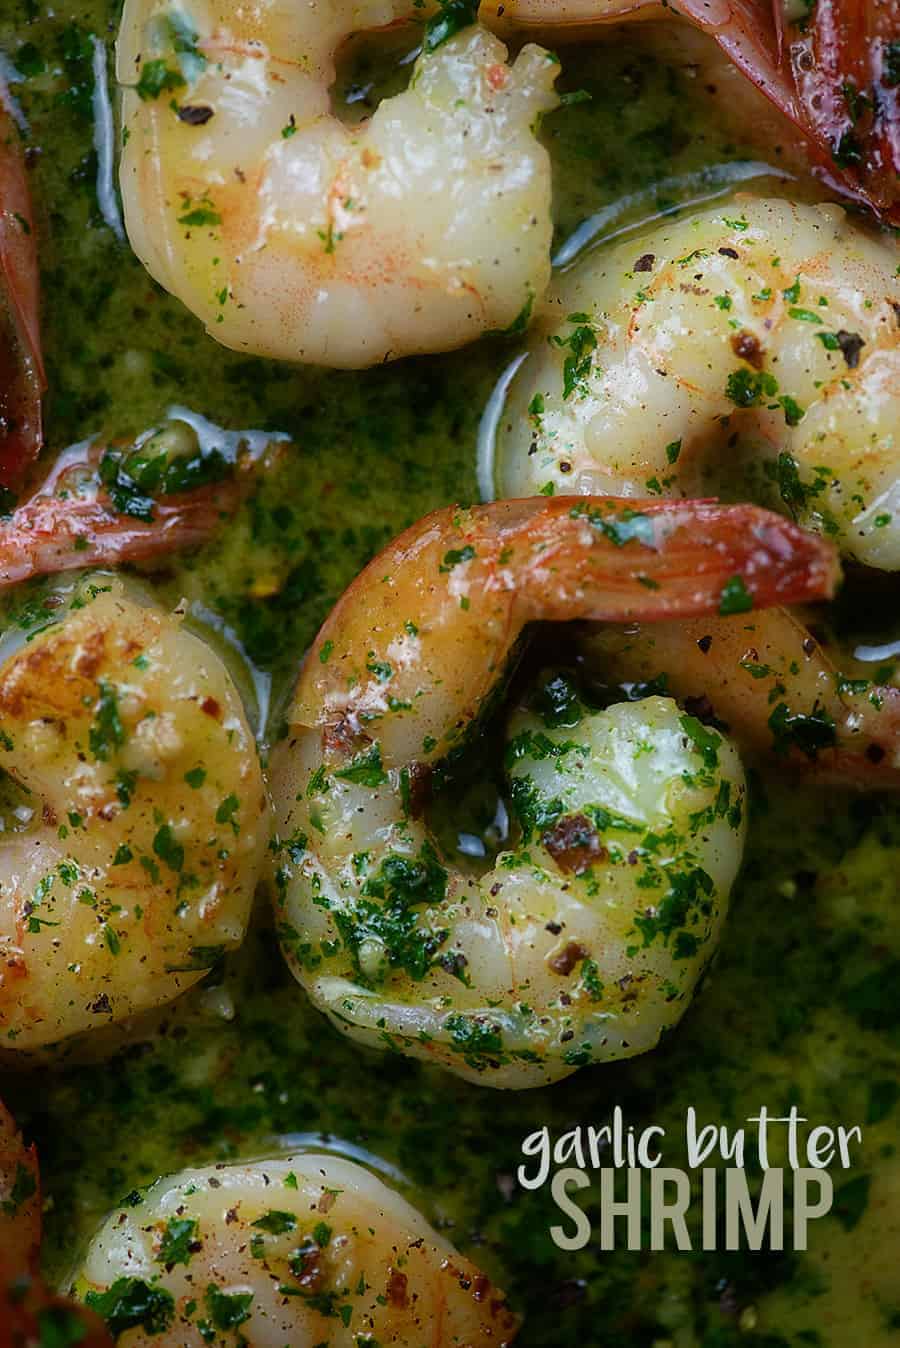 Shrimp cooked in garlic butter